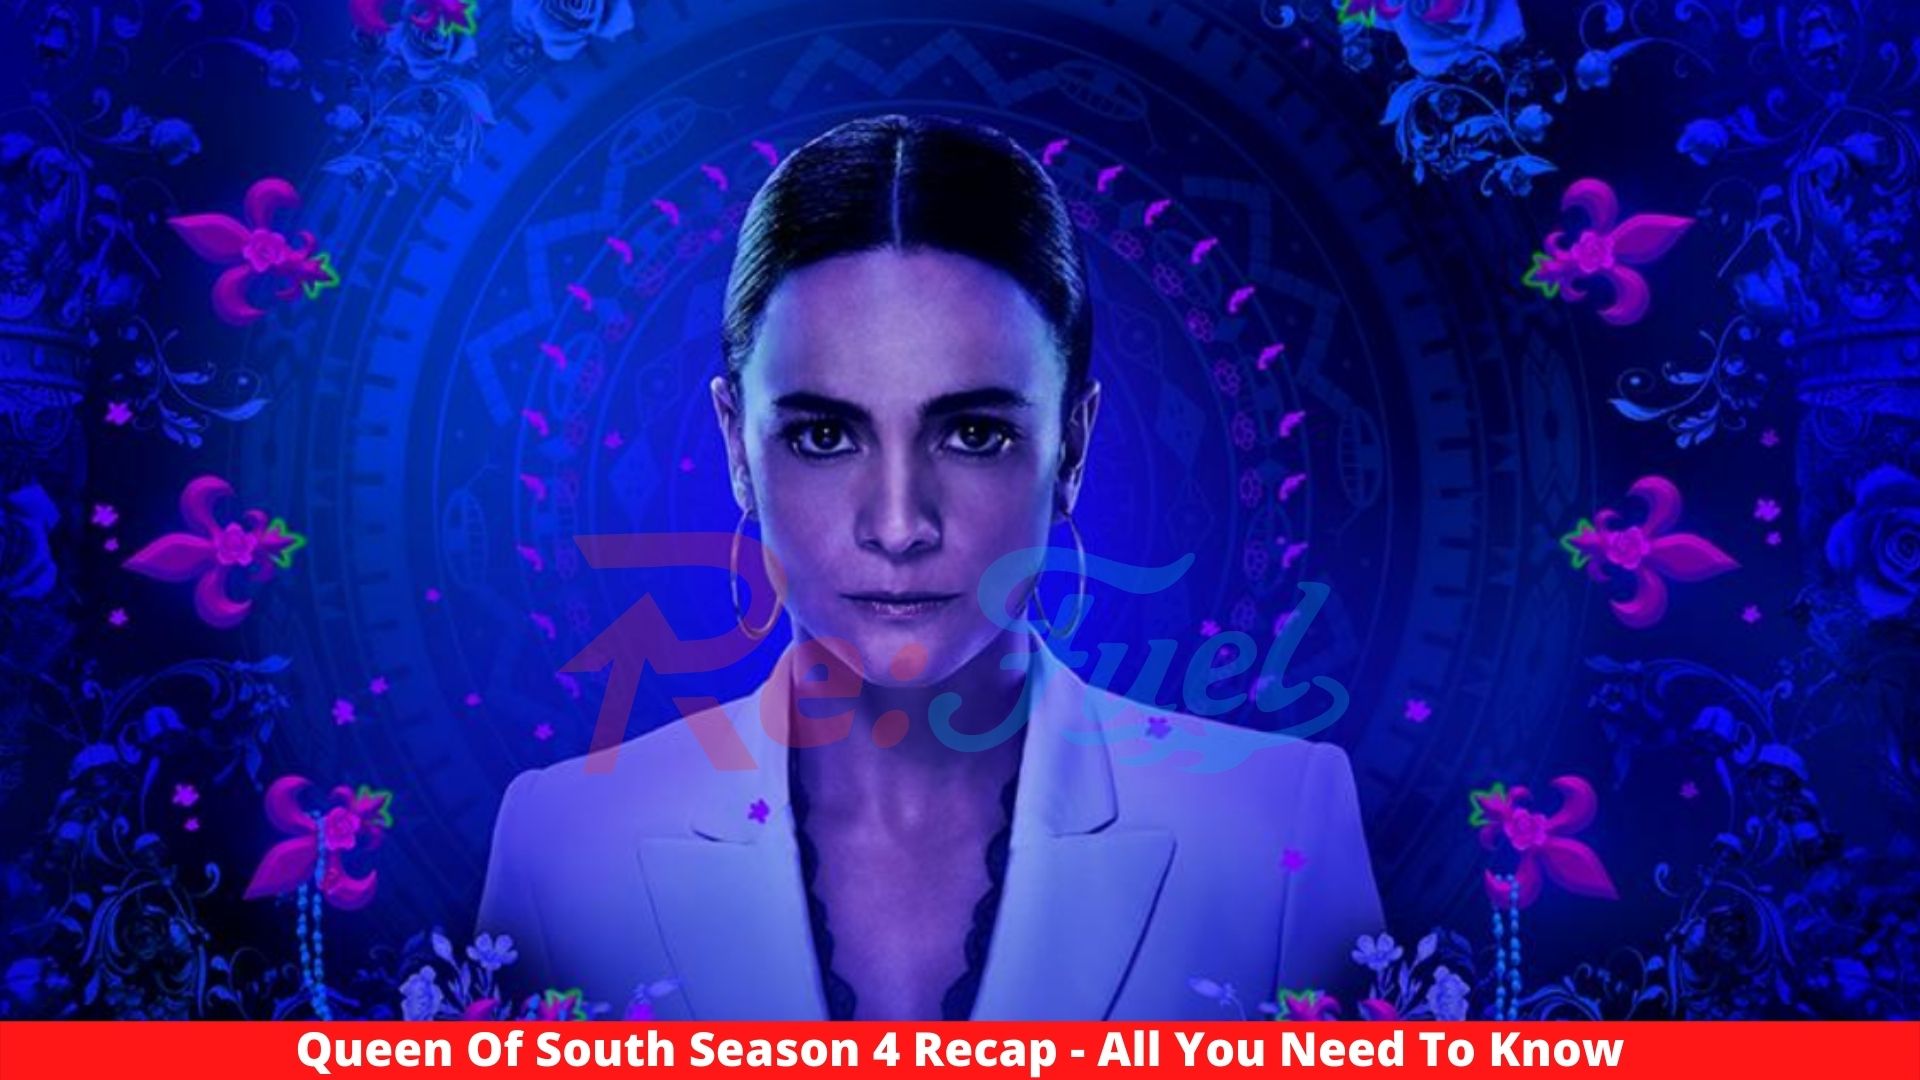 Queen Of South Season 4 Recap - All You Need To Know